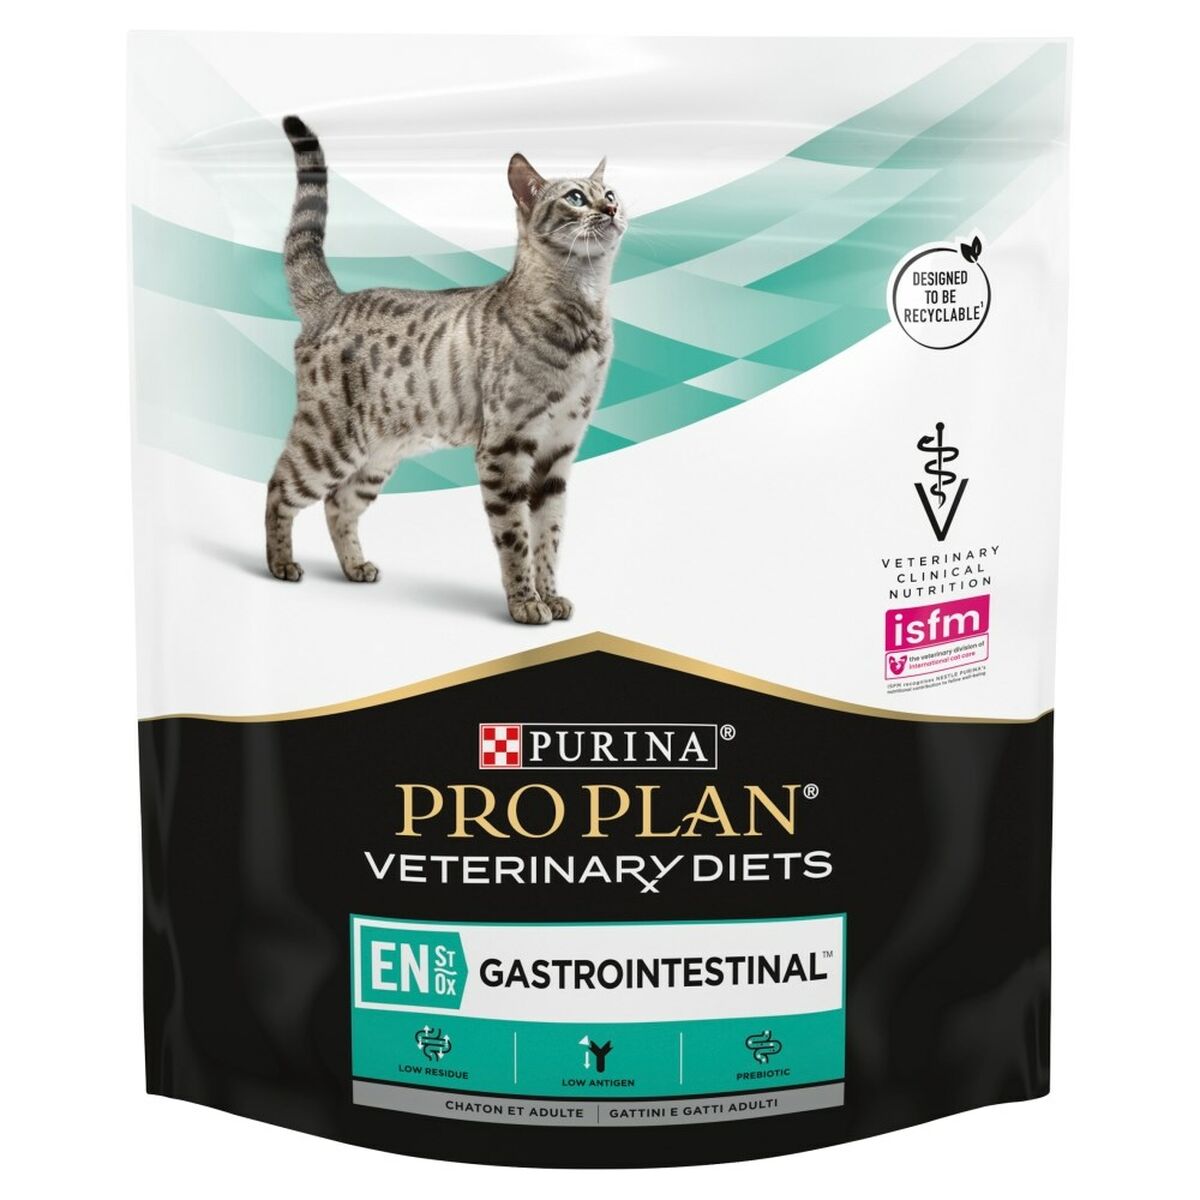 Aliments pour chat Purina Plan Veterinary Diets St/Ox Gastrointestinal Poulet 400 g